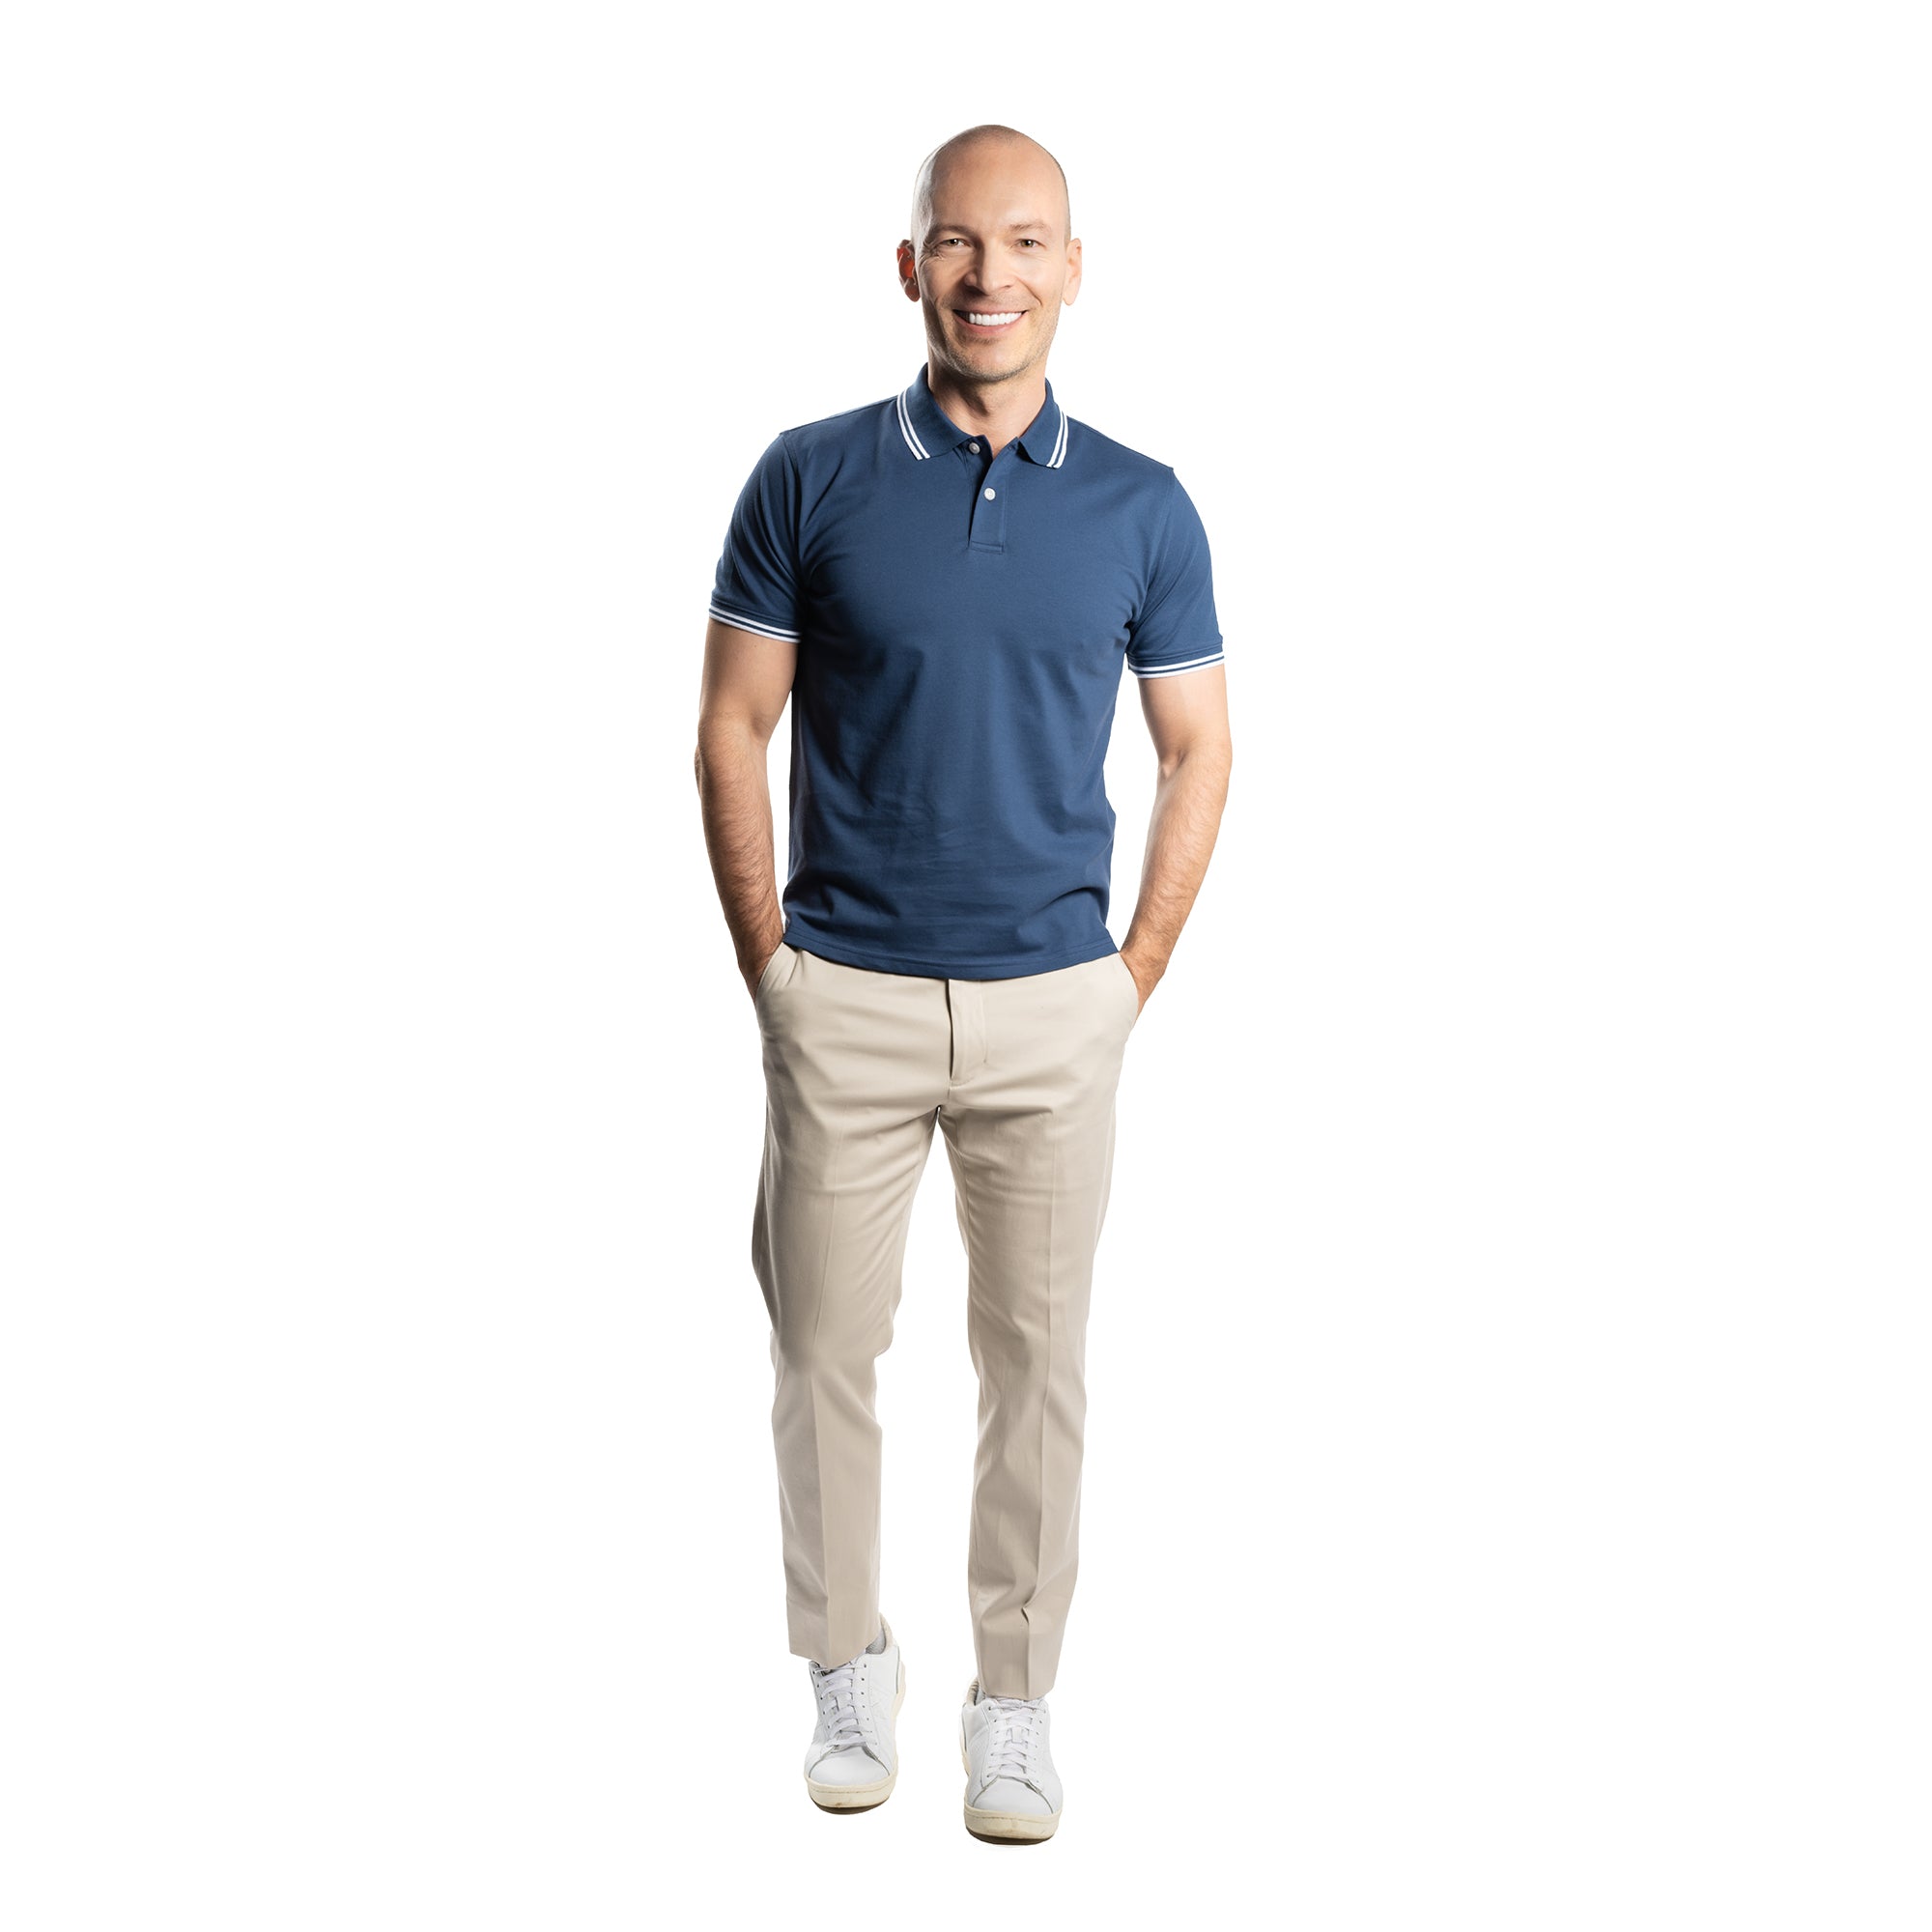 James Polo Shirt - Navy Tipped